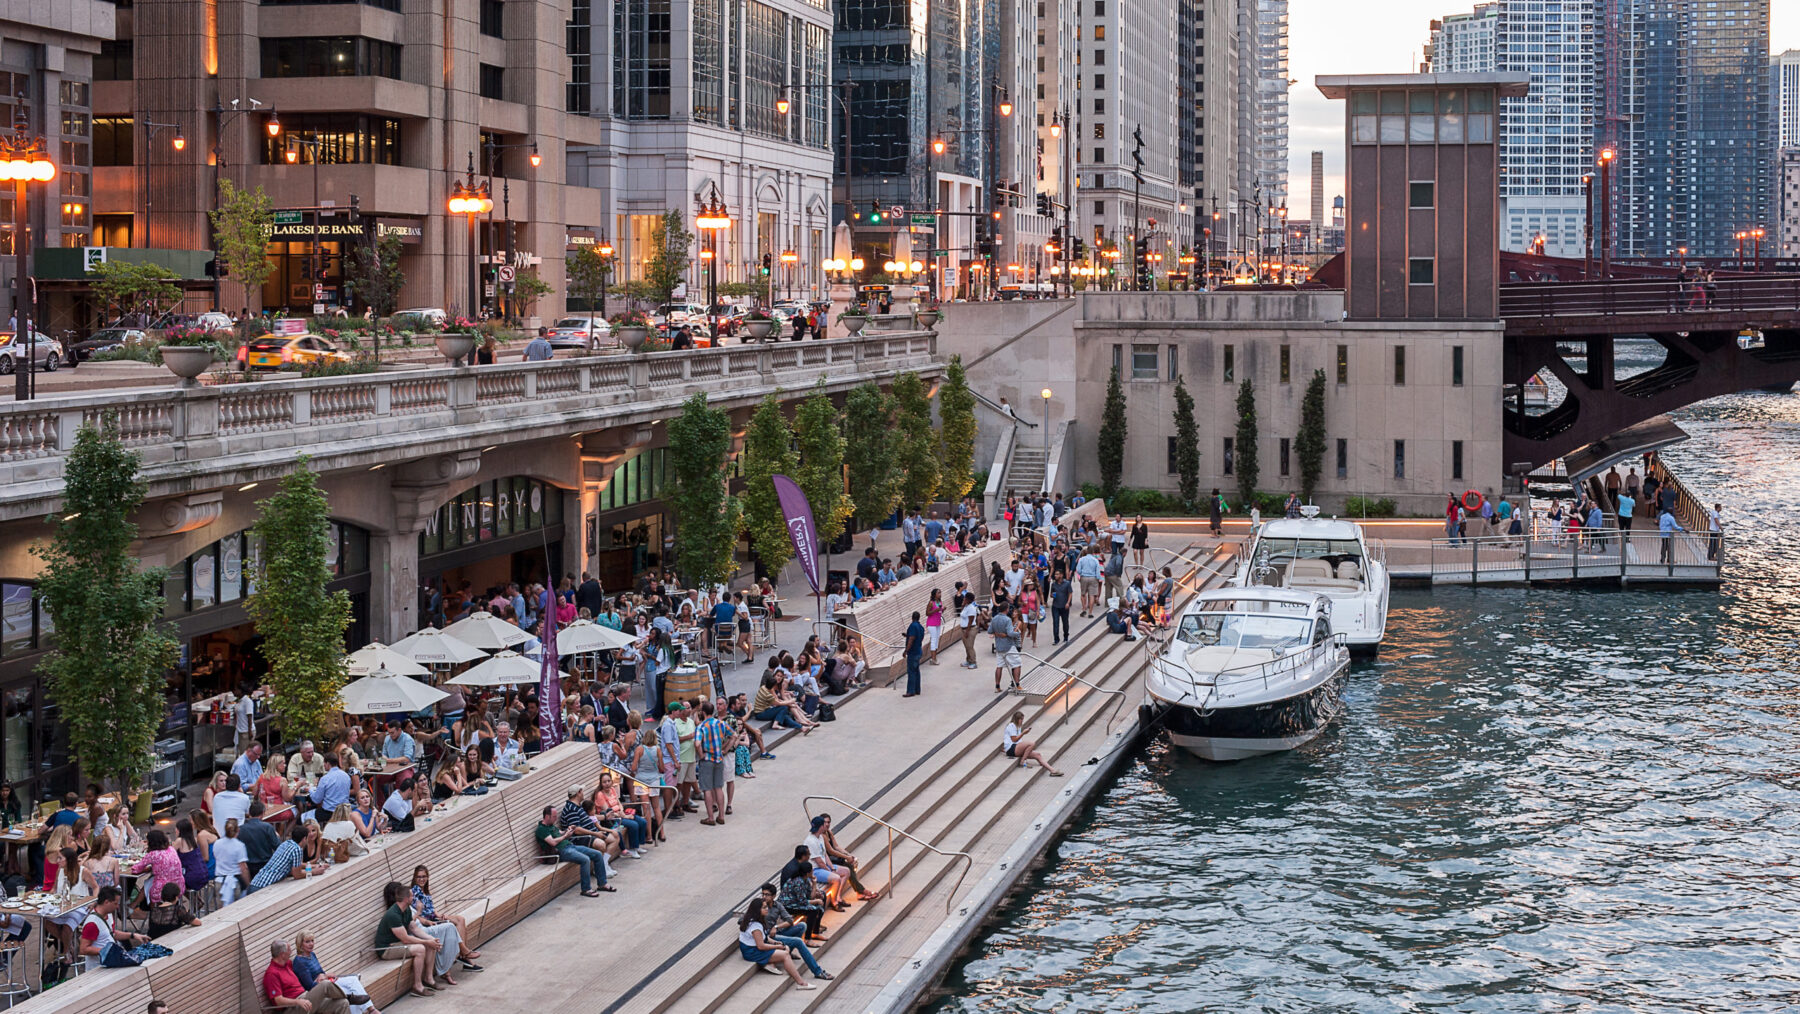 People sitting on stairs in front of Chicago Riverwalk, boats parked alongside them